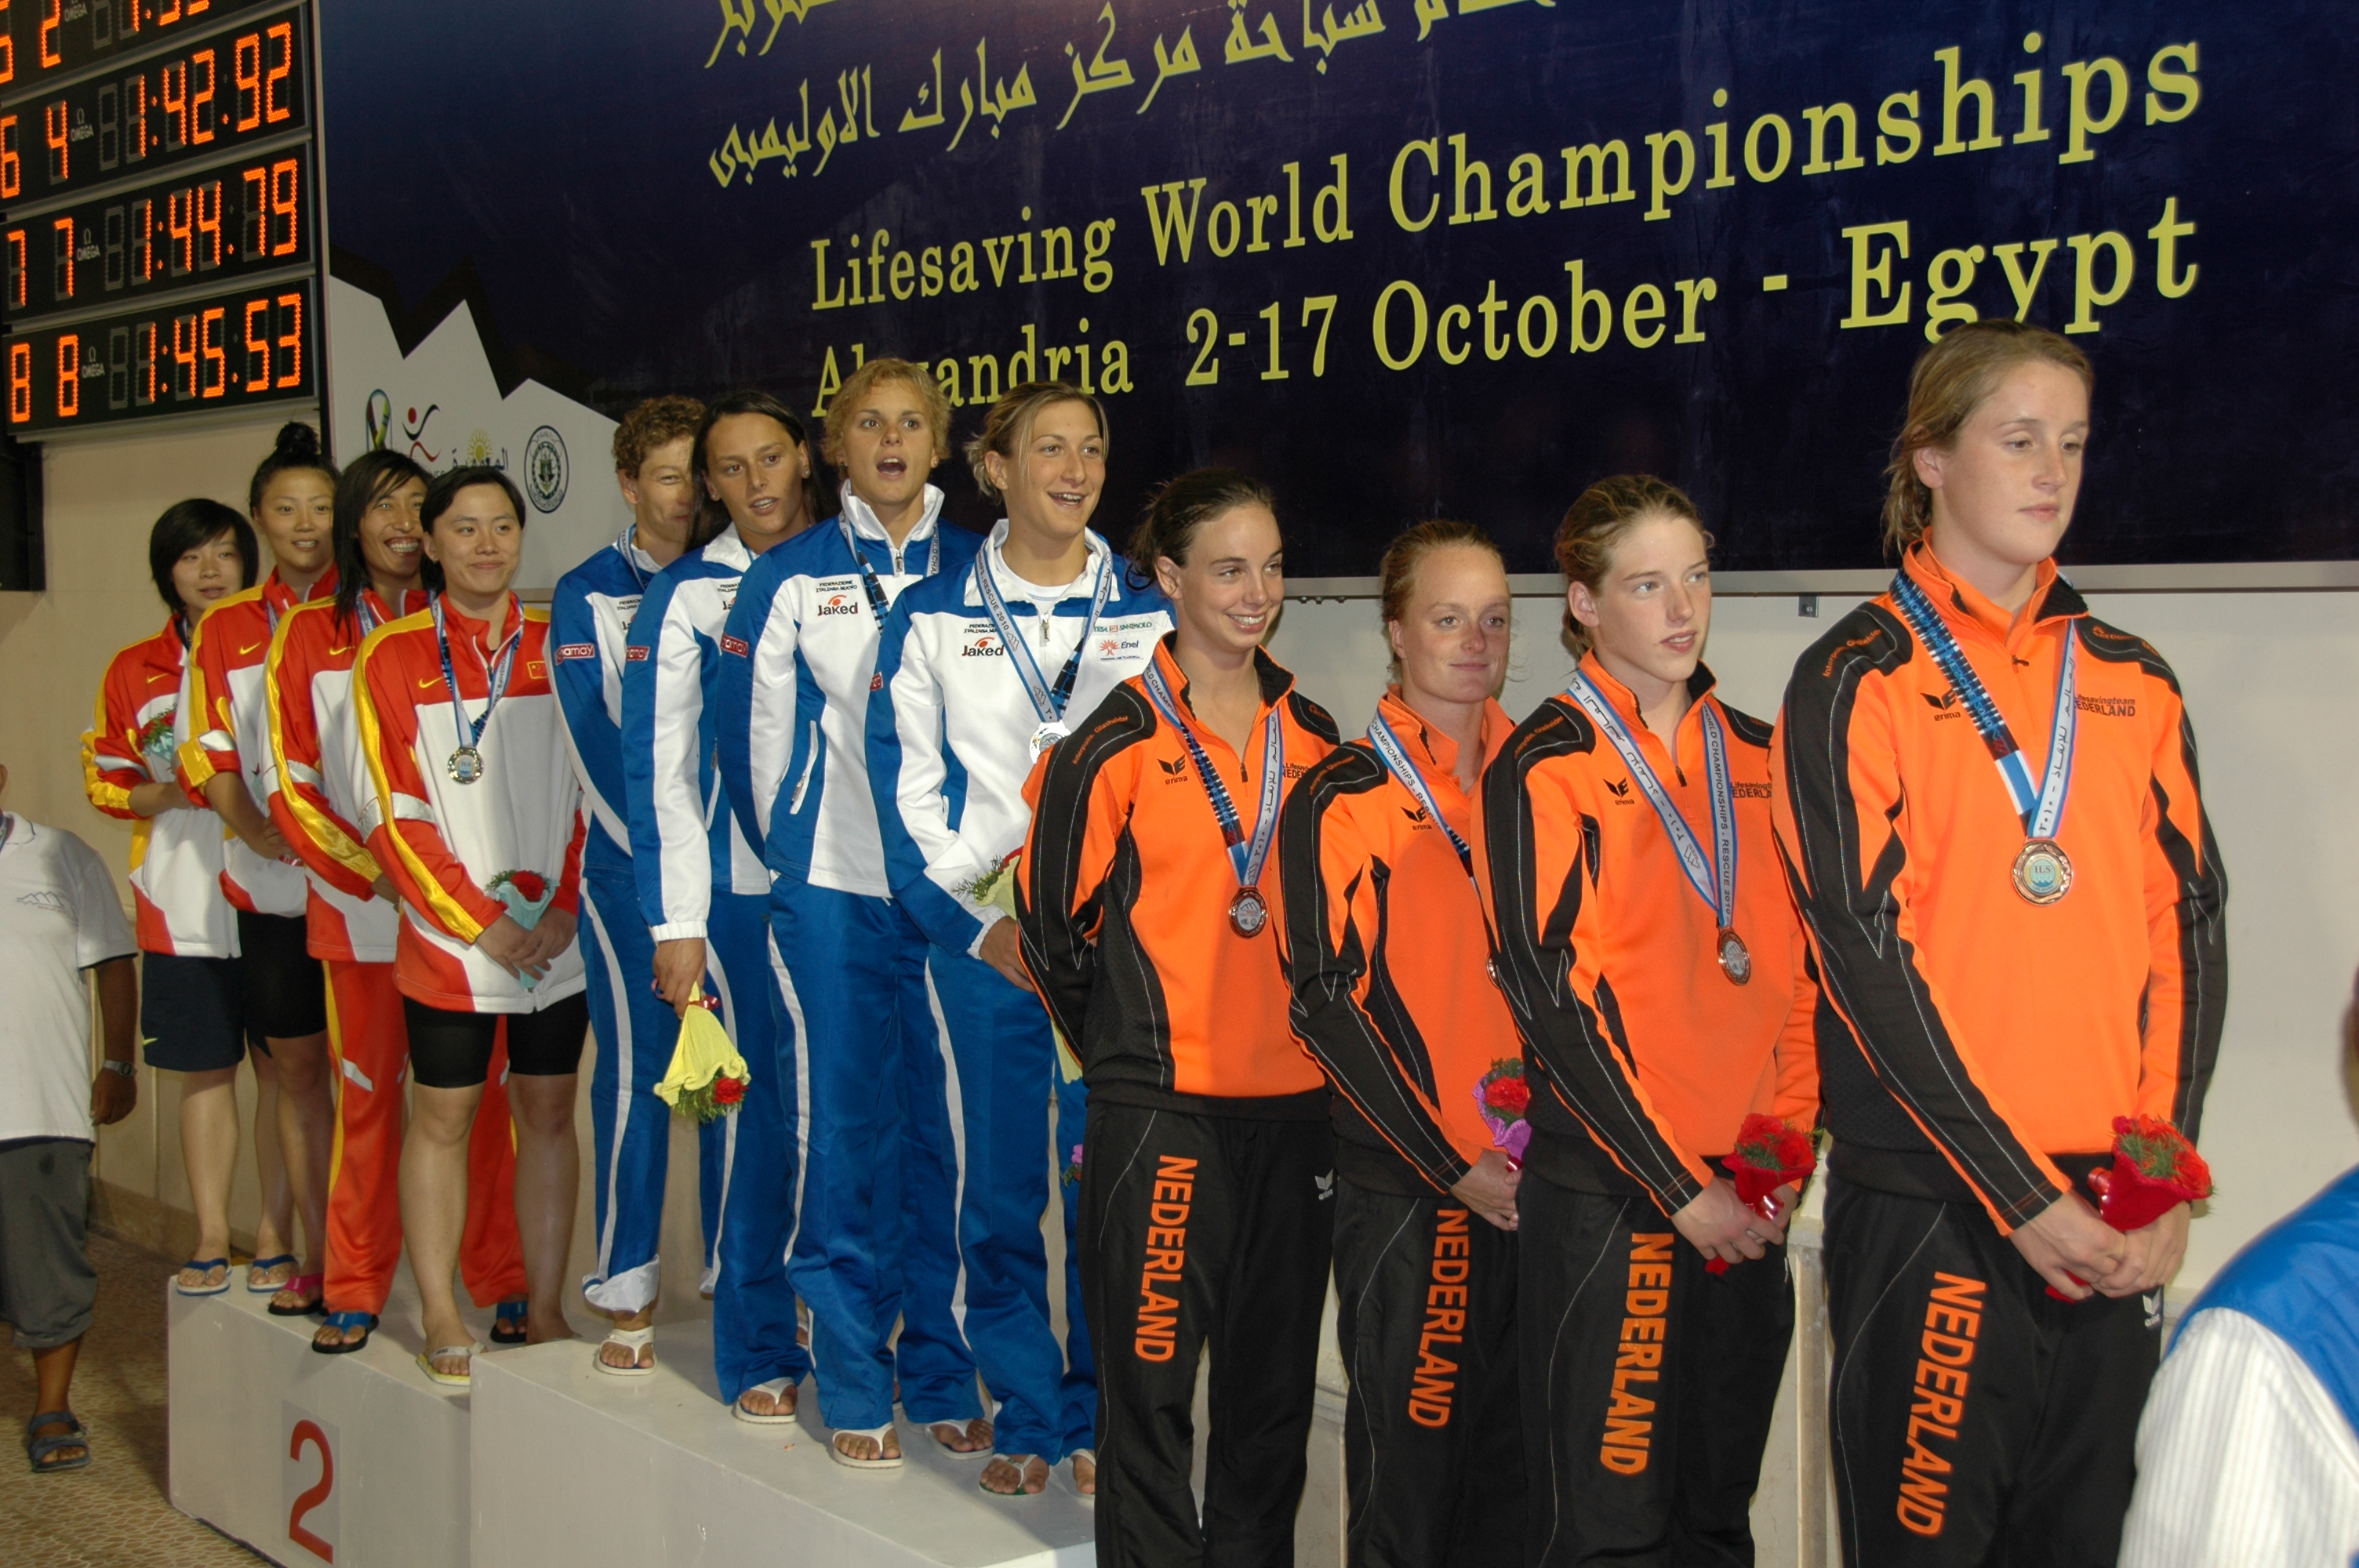 wk dames medaille rescue medley